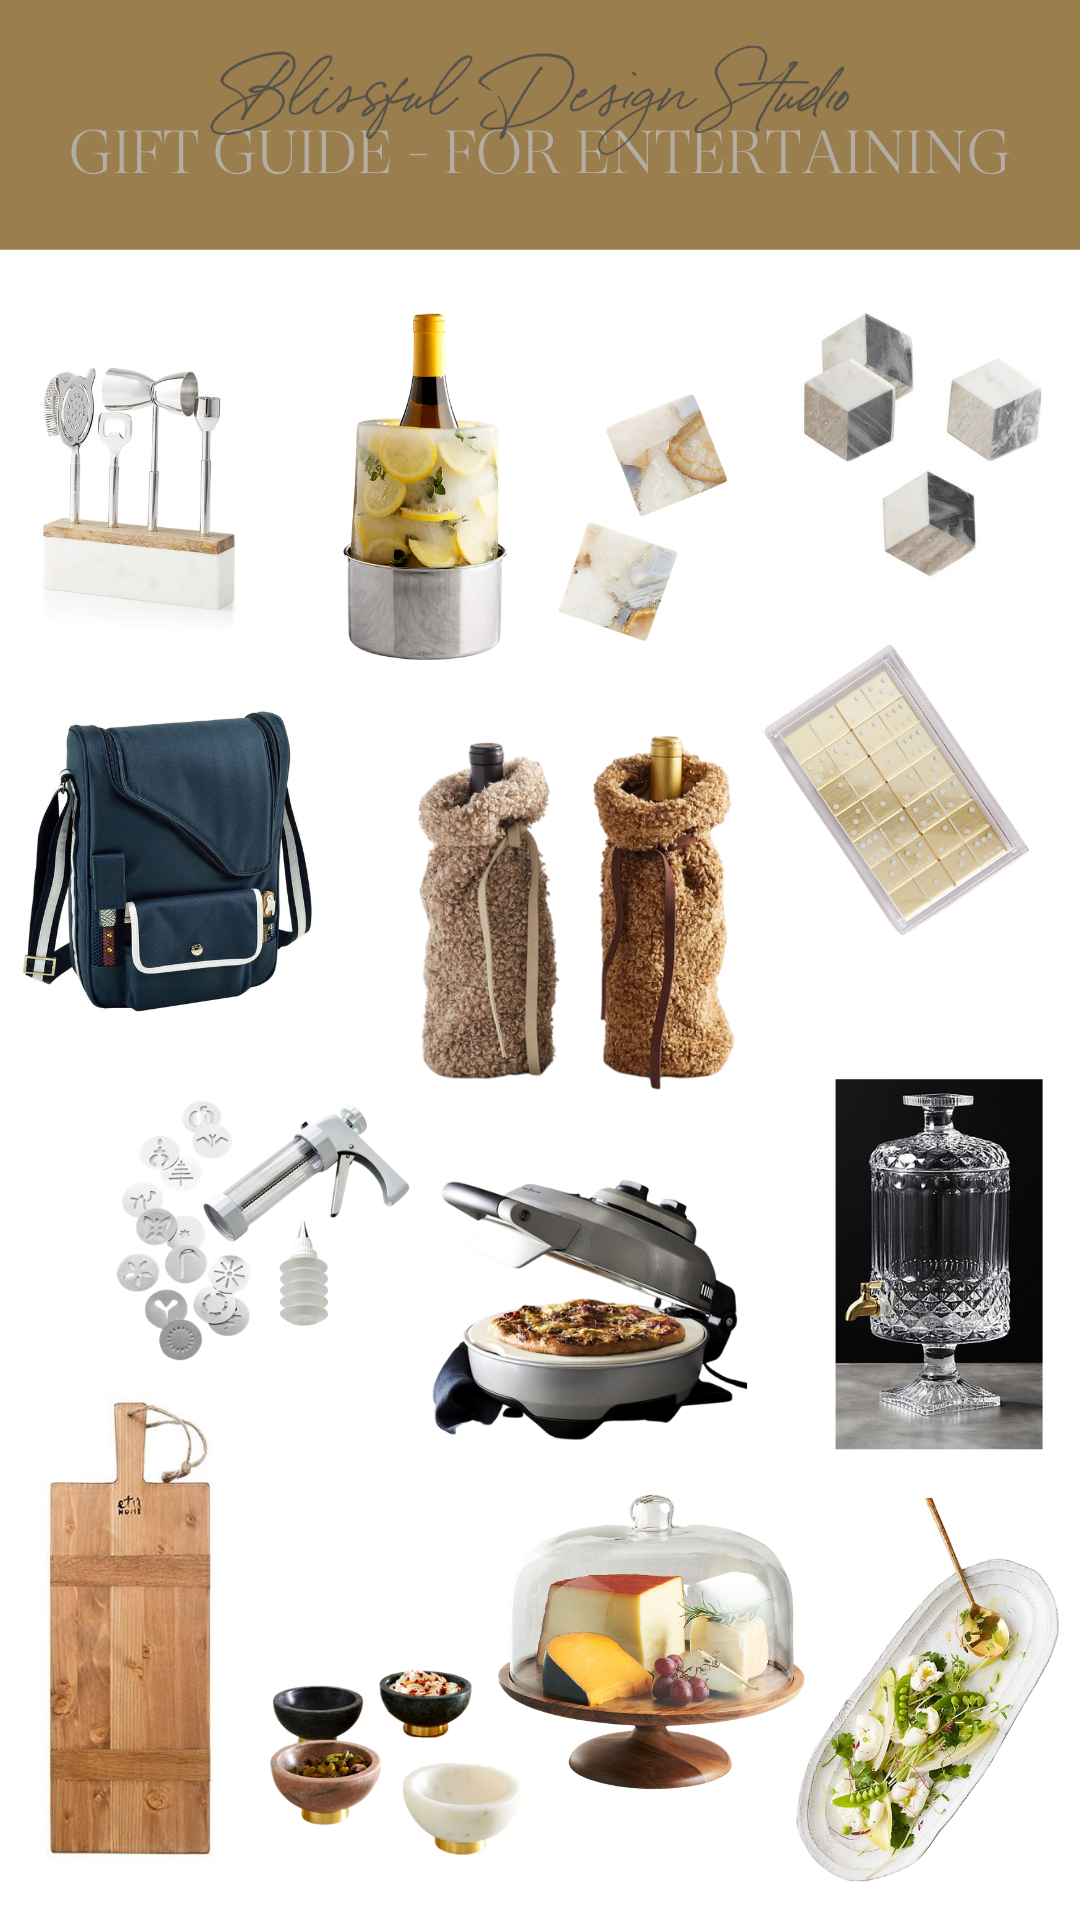 Christmas gifts for entertaining